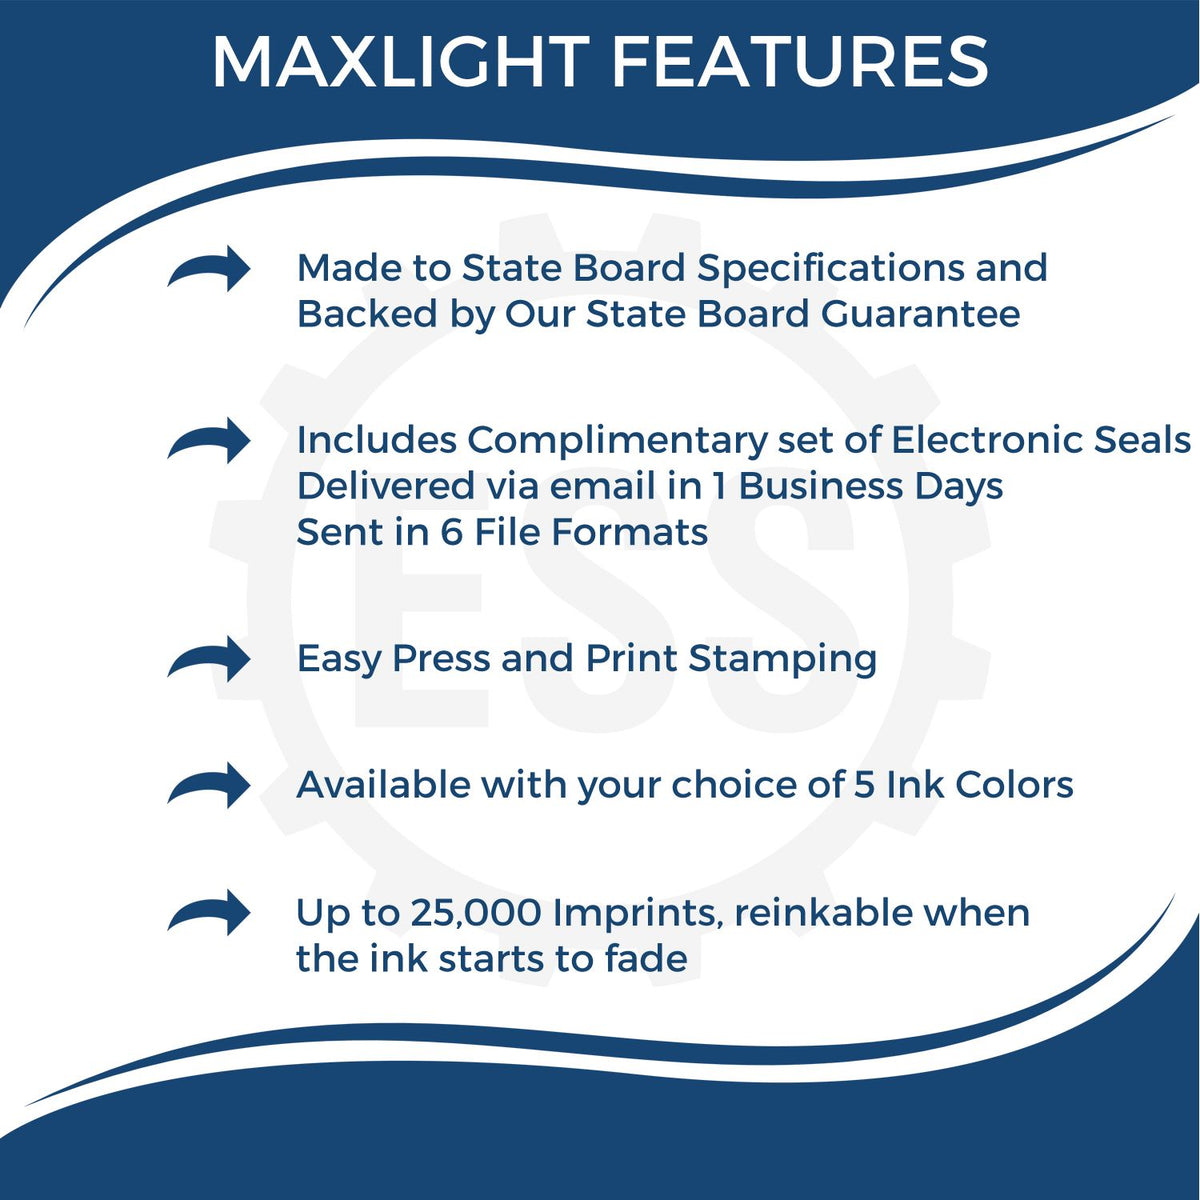 A picture of an infographic highlighting the selling points for the Premium MaxLight Pre-Inked Maine Engineering Stamp